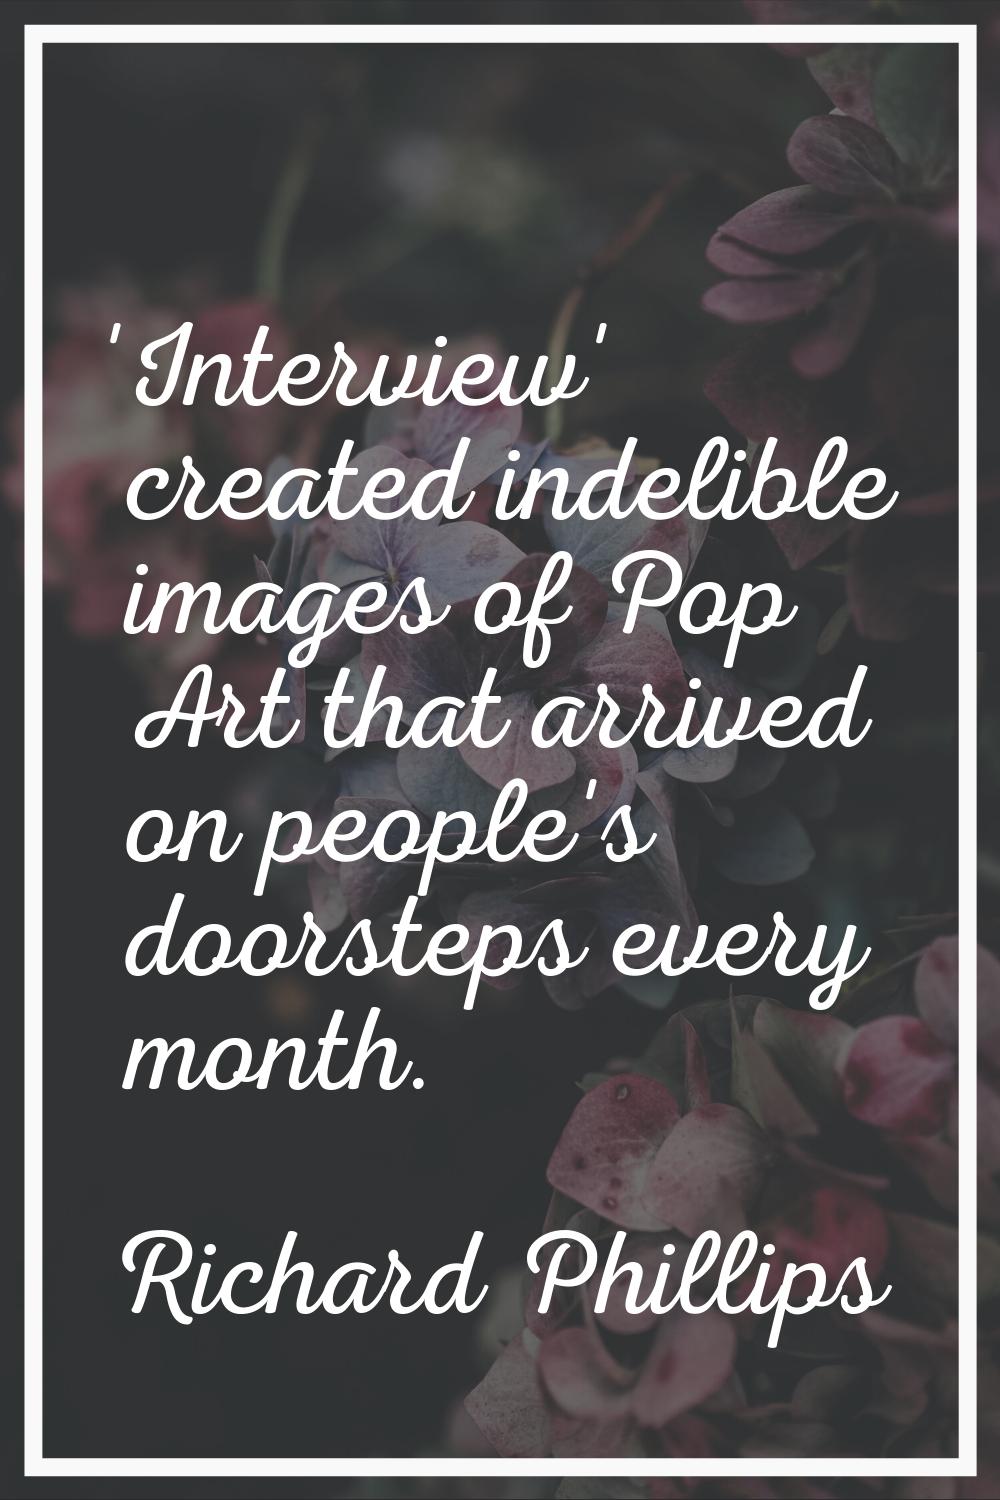 'Interview' created indelible images of Pop Art that arrived on people's doorsteps every month.